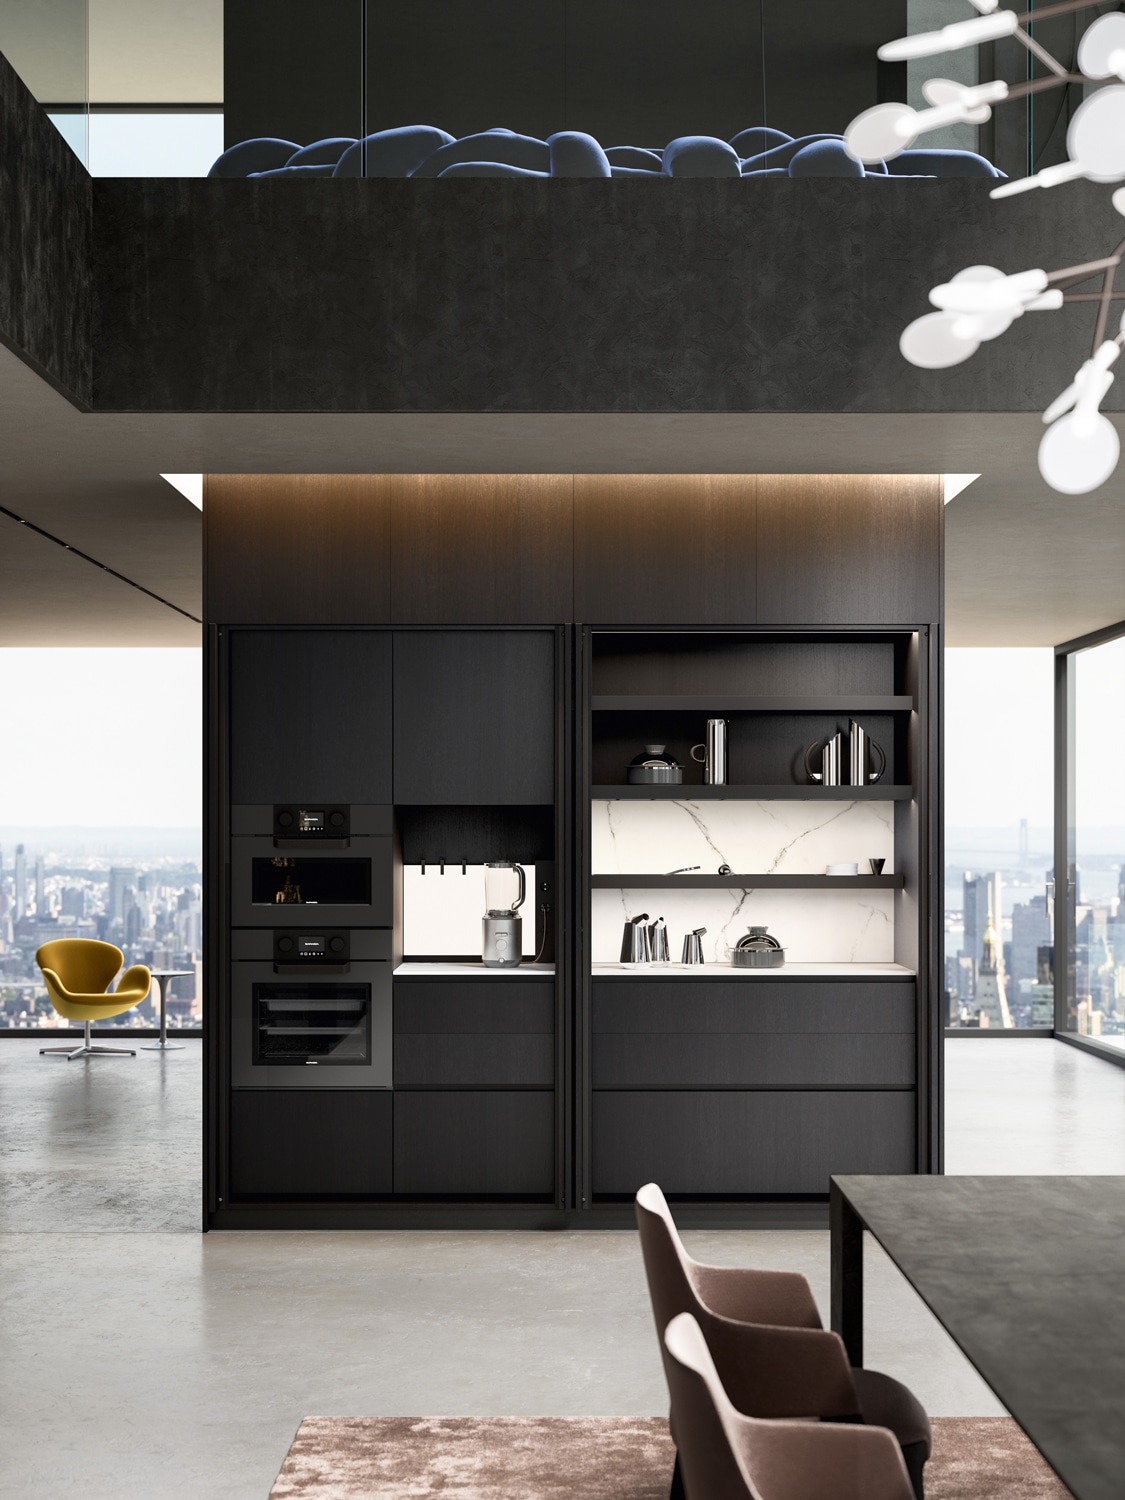 Tall cabinets with two Wing units. In each unit, pocket doors fold out of view to reveal a customized space which can include: drawers, shelves, accessorized LED-lit back panel, integrated and counter appliances, and pull-out stainless steel tops for extra surfaces.